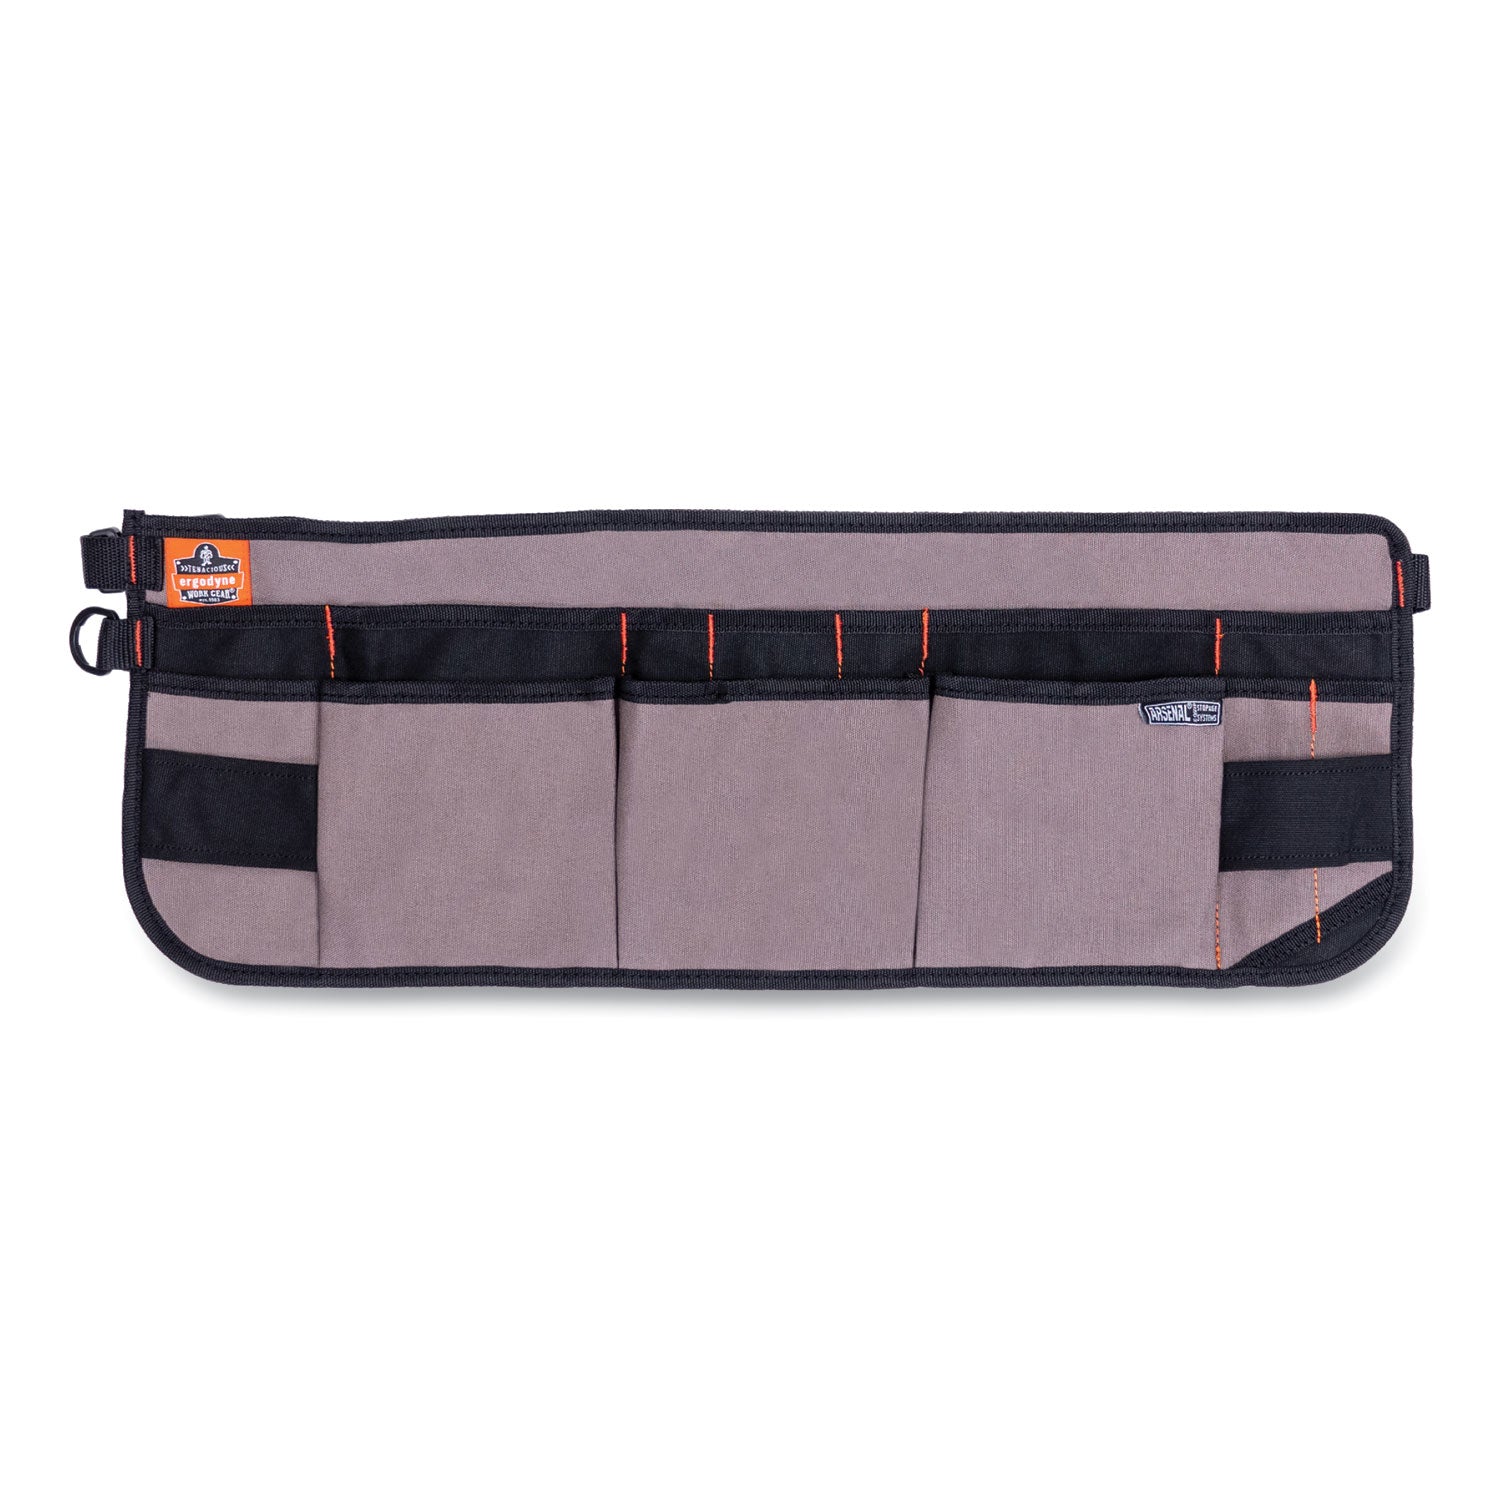 arsenal-5707-canvas-waist-apron-14-compartments-255-x-34-canvas-gray-ships-in-1-3-business-days_ego13698 - 1